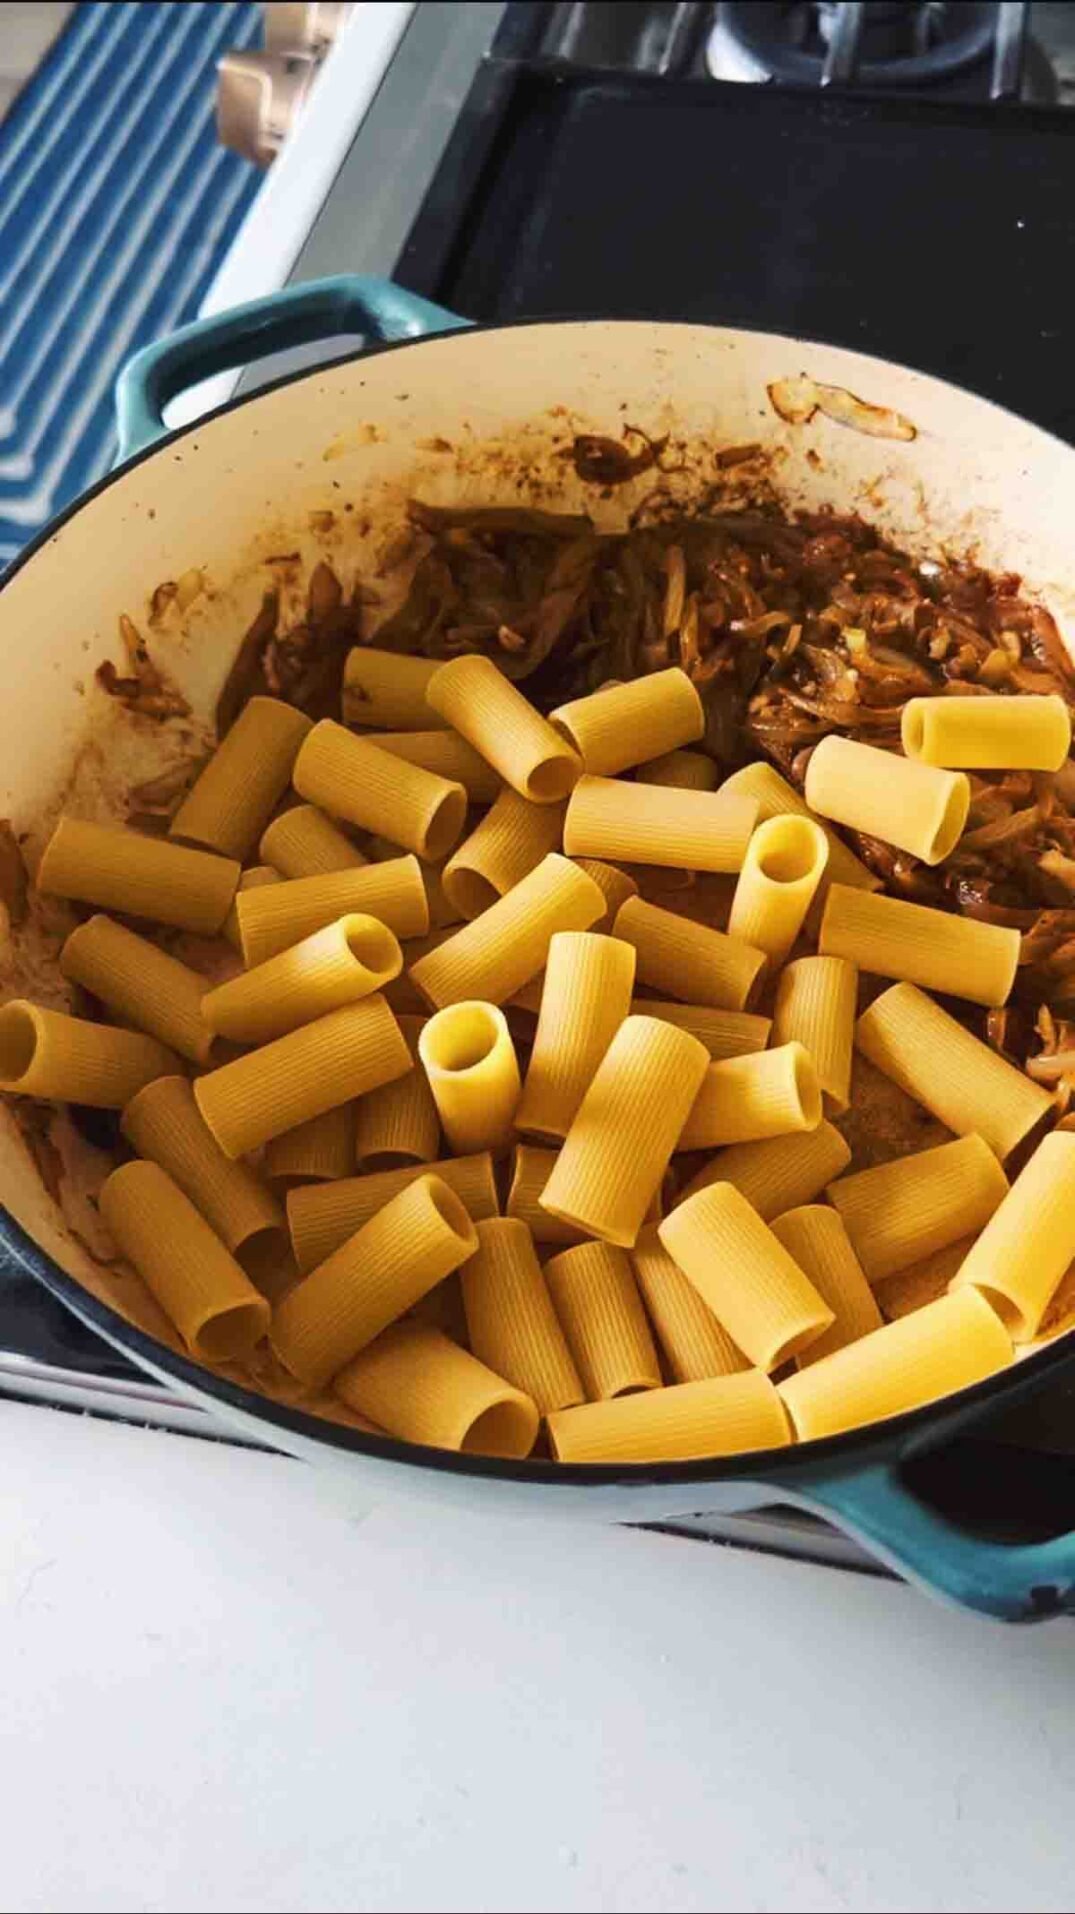 dry rigatoni and caramelized onions in a blue braising dish.